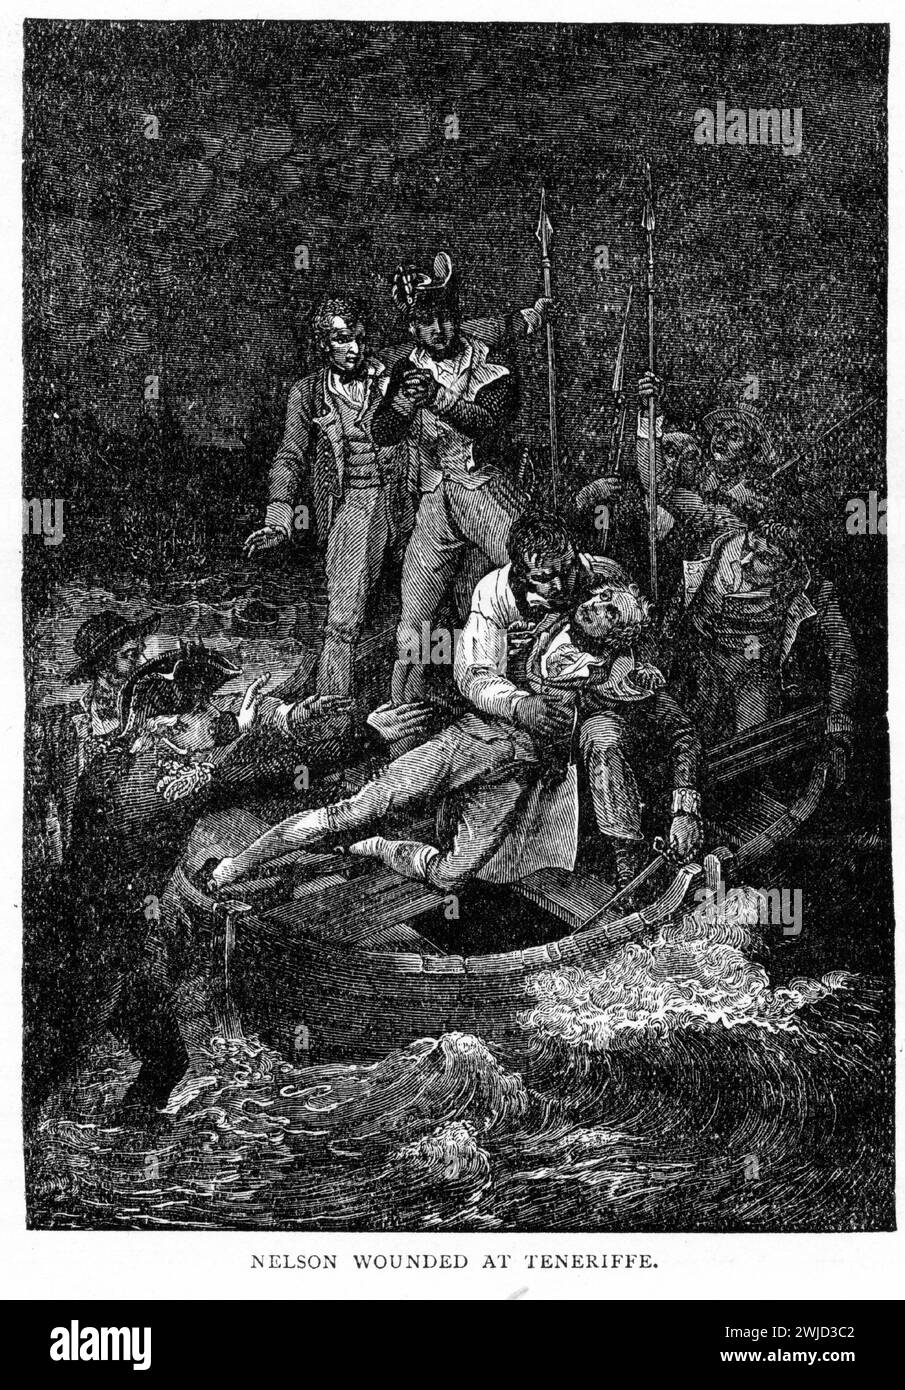 Engraving of Nelson wounded at Tenerife on 24 July 1797. Image published circa 1880 Stock Photo